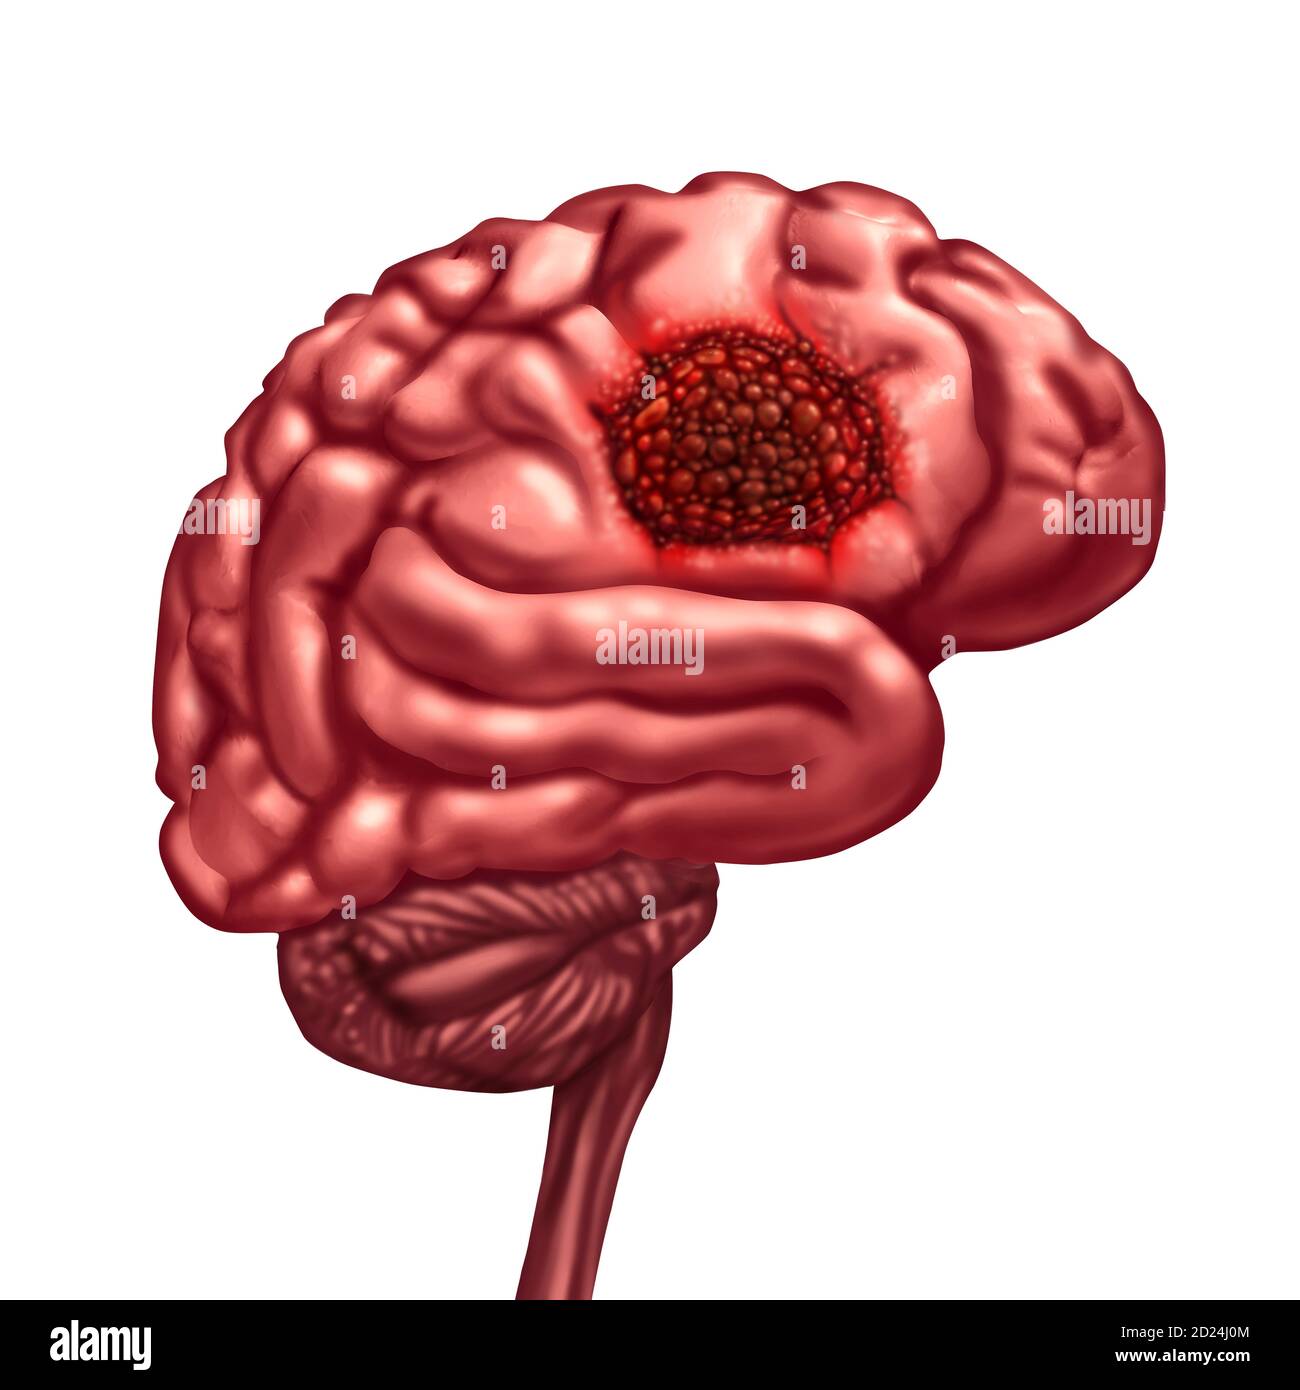 Brain cancer anatomy concept and malignant tumor symbol as a neurology body part with a microscopic magnification of malignant cells dividing. Stock Photo